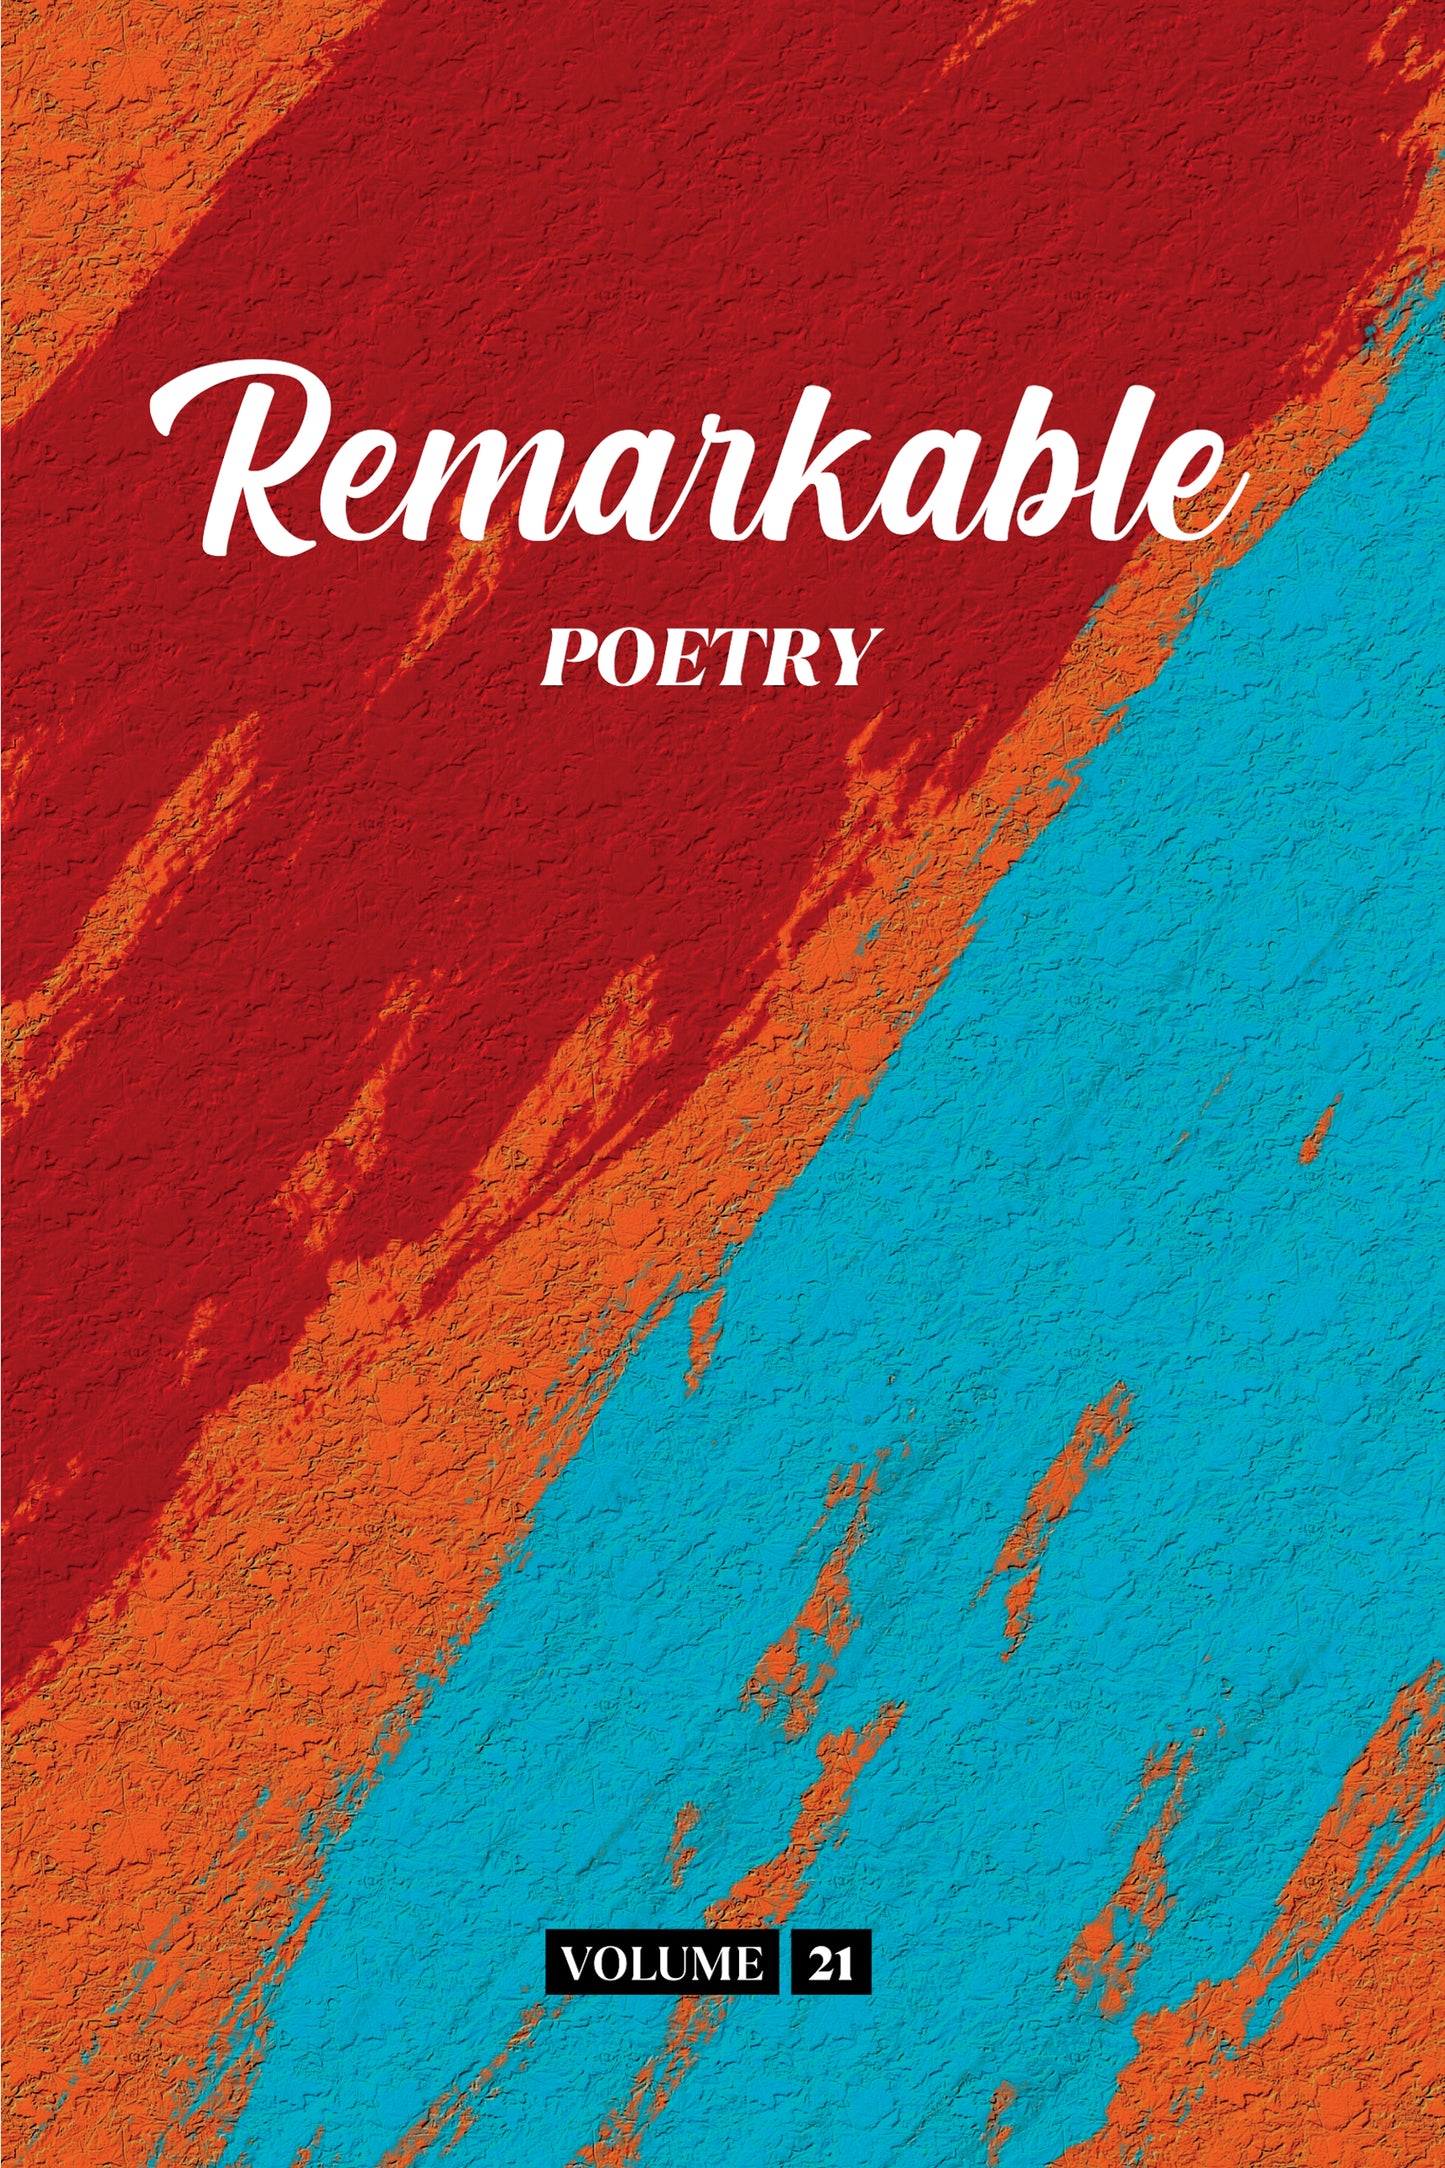 Remarkable Poetry (Volume 21) - Physical Book (Pre-Order)